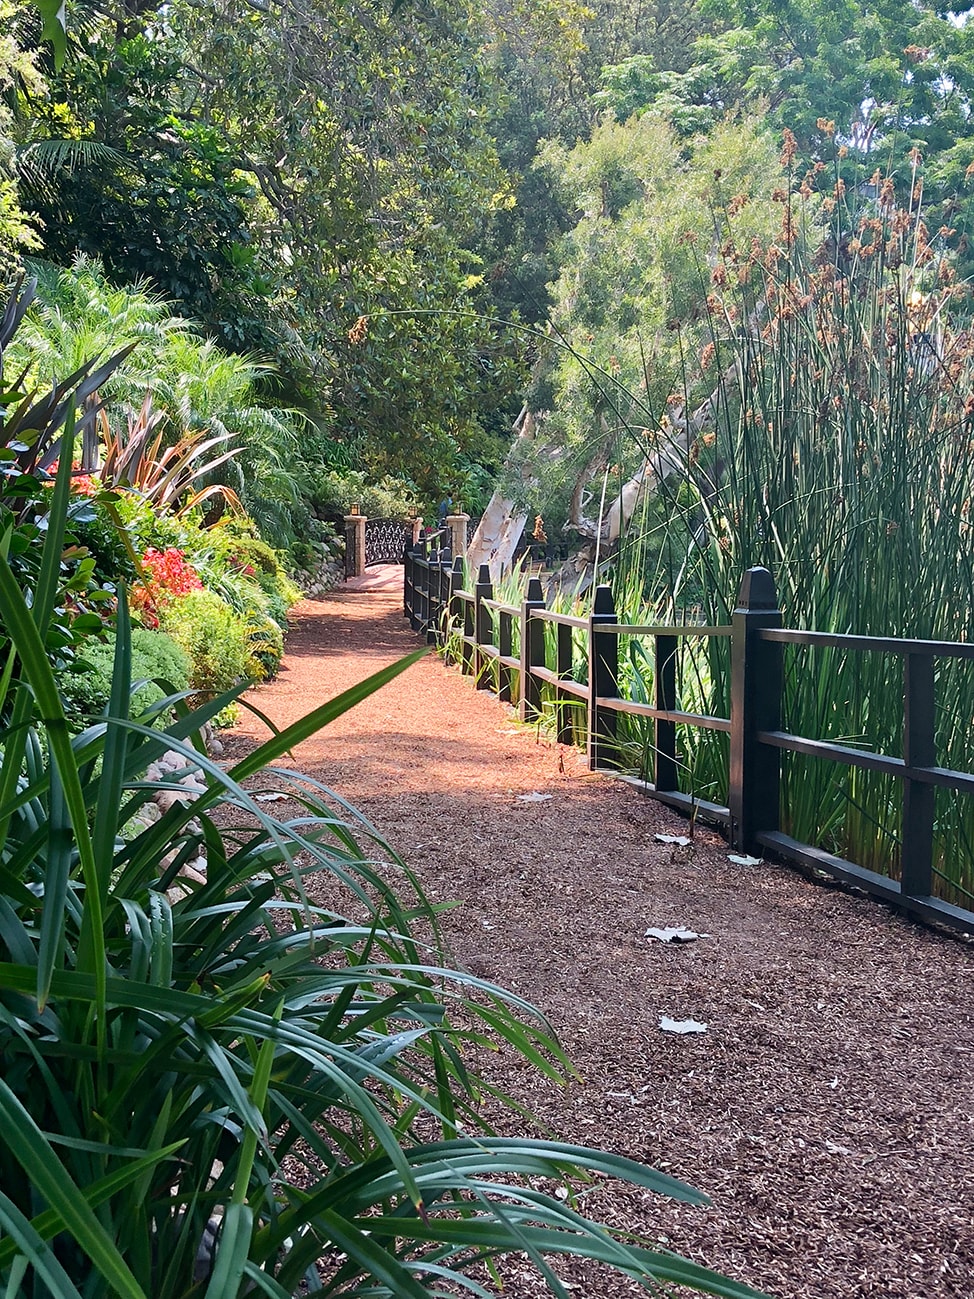 If you visit the Lake Shrine in Malibu at the right time, you can get this beautiful path all to yourself.